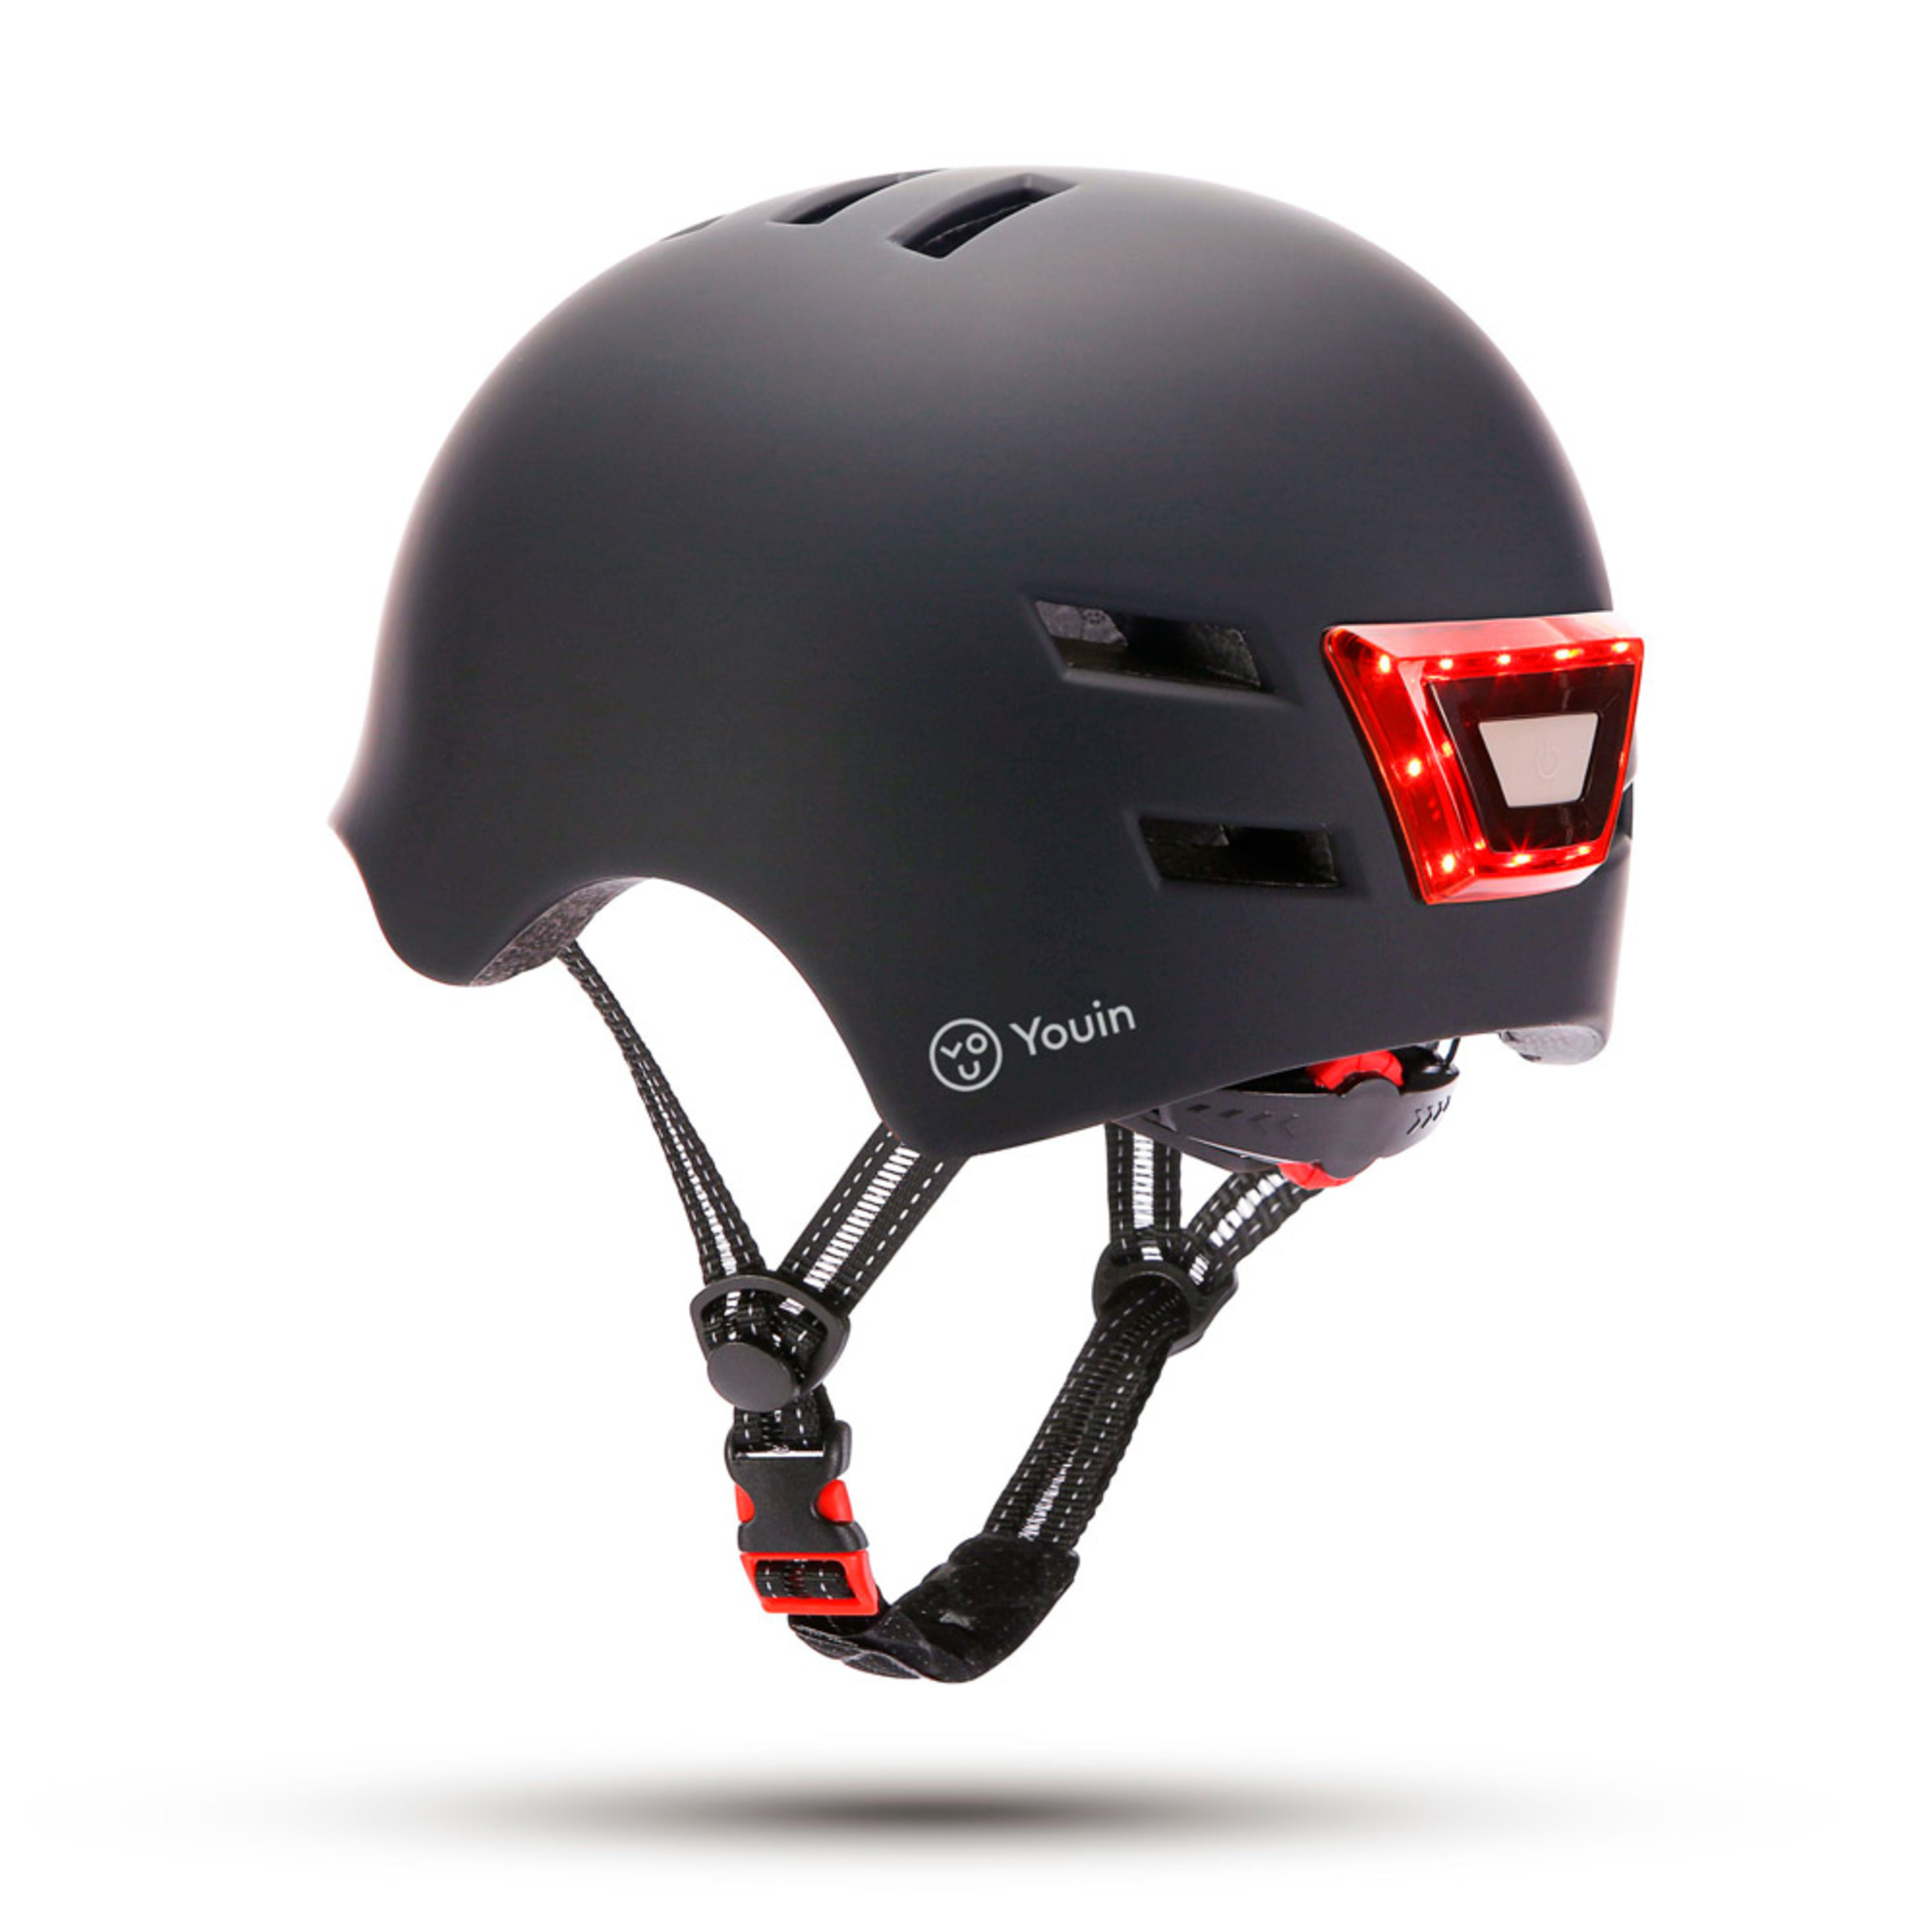 Casco Youin Con Luces Led Frontal Y Trasera Ajustable - negro - 